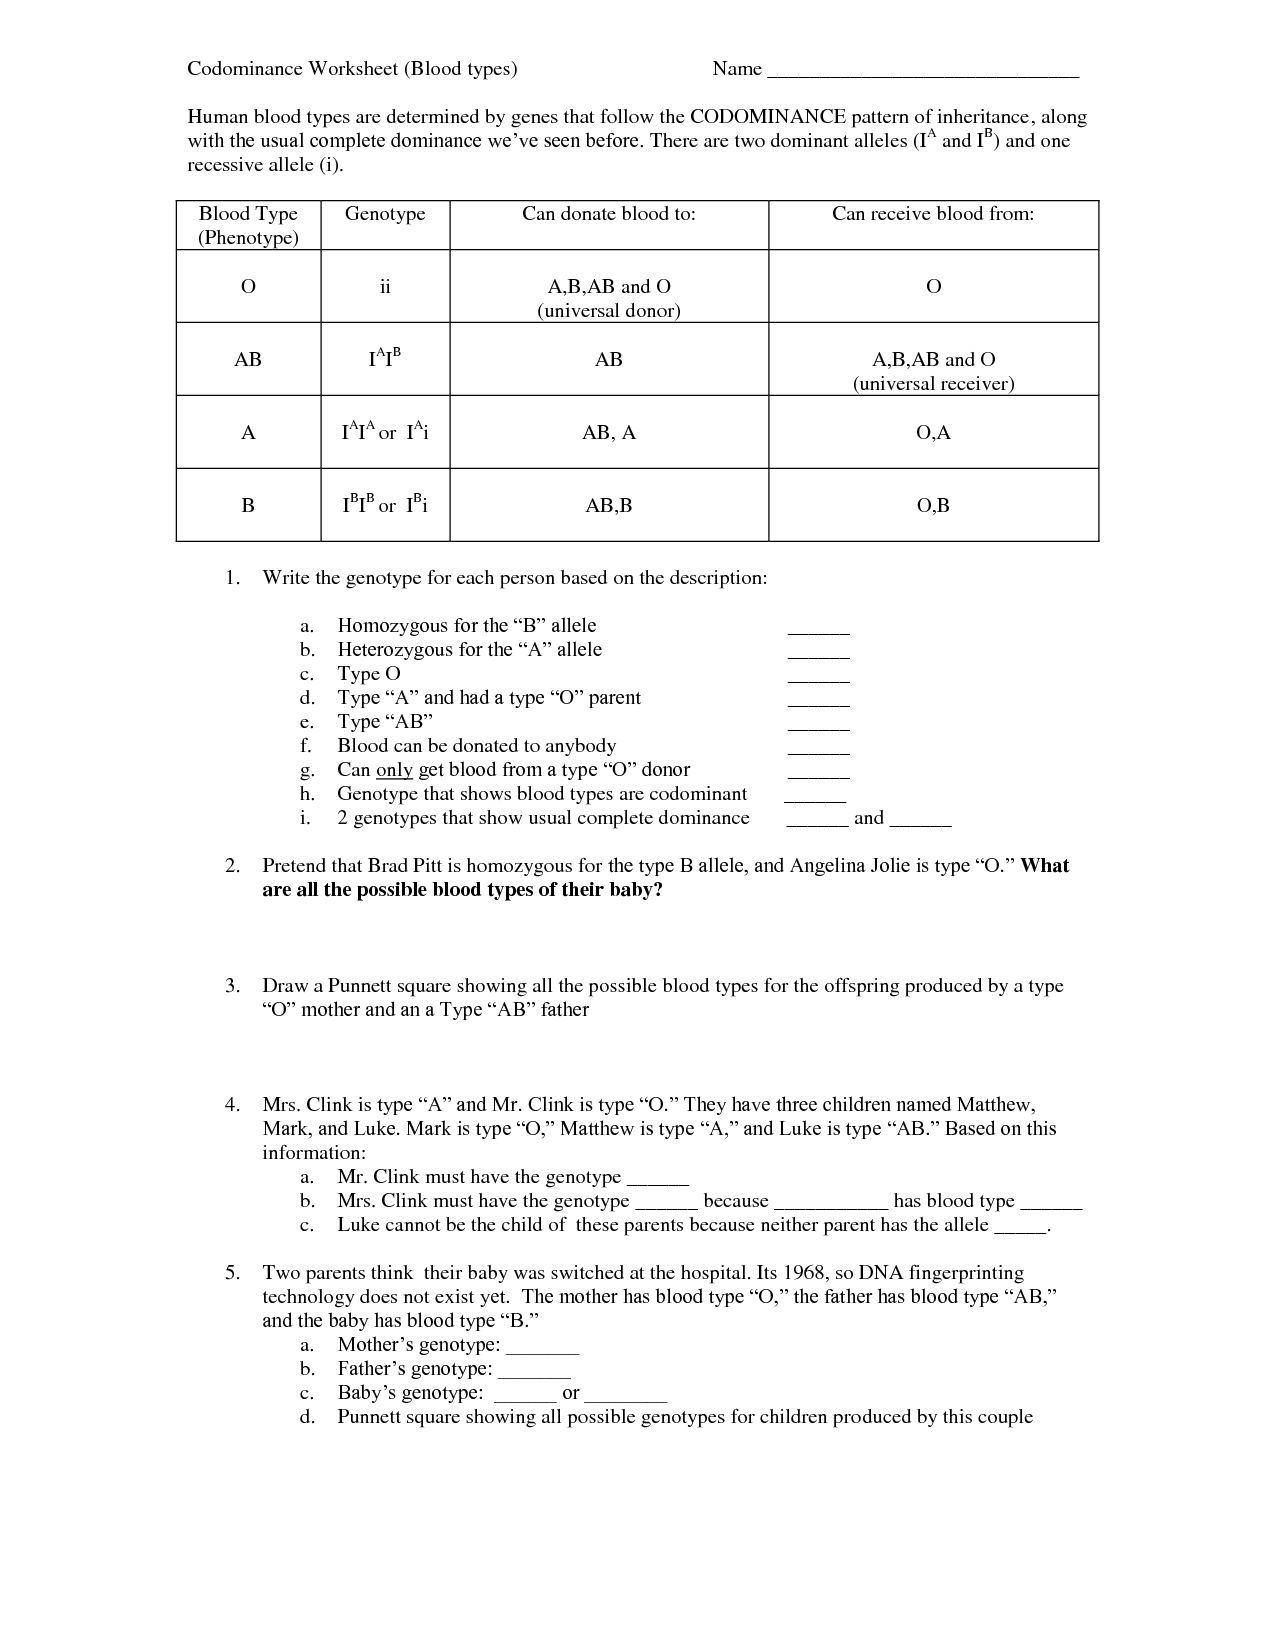 17-incomplete-and-codominance-worksheet-answers-worksheeto